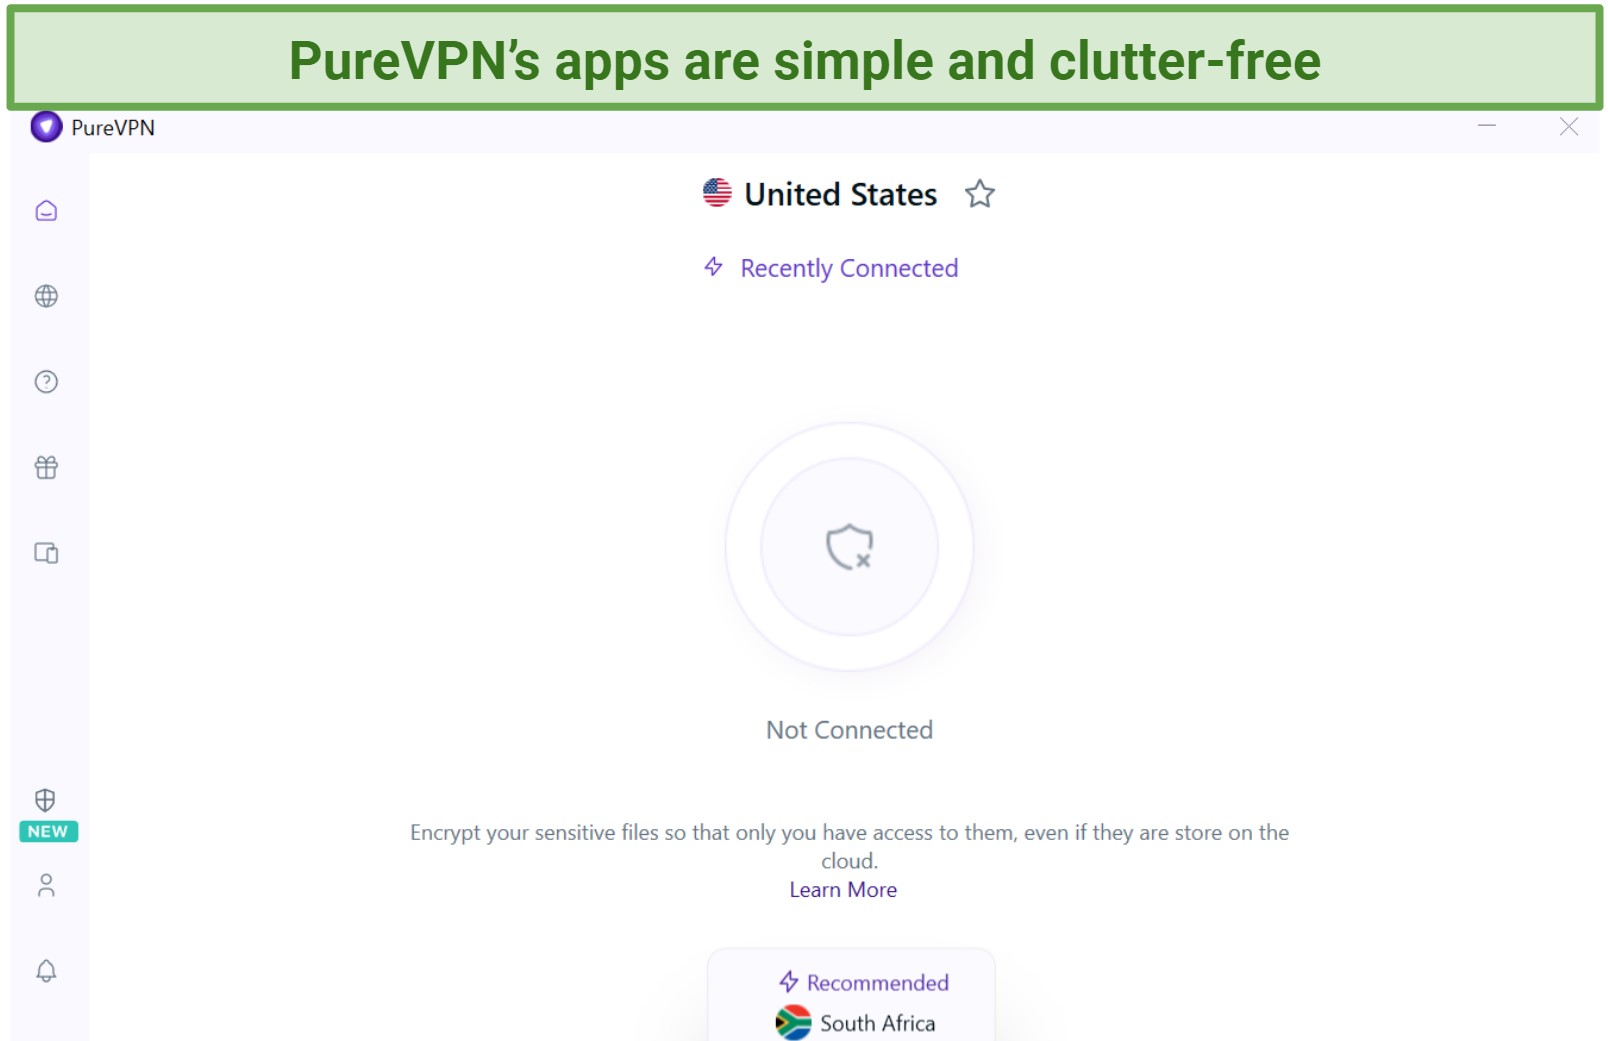 A snapshot showing PureVPN's clutter-free user interface